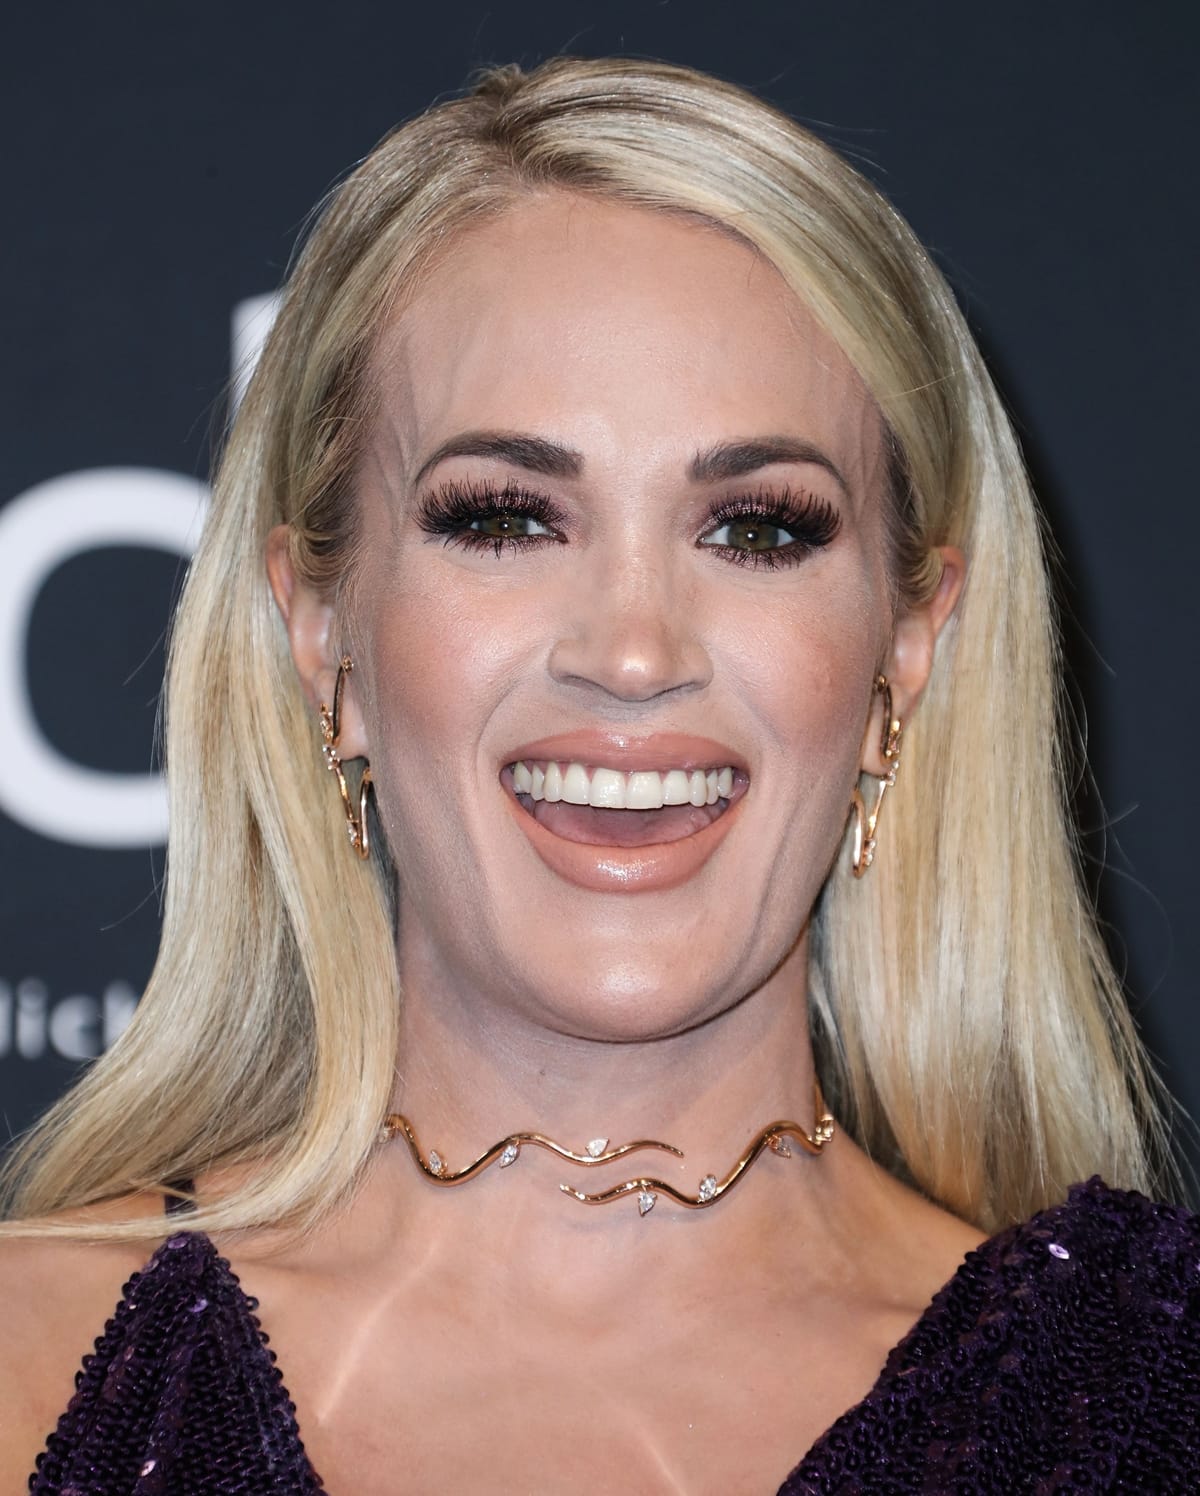 Carrie Underwood grew up in the Bible Belt and is open about how dedicated she is to her faith in Jesus Christ